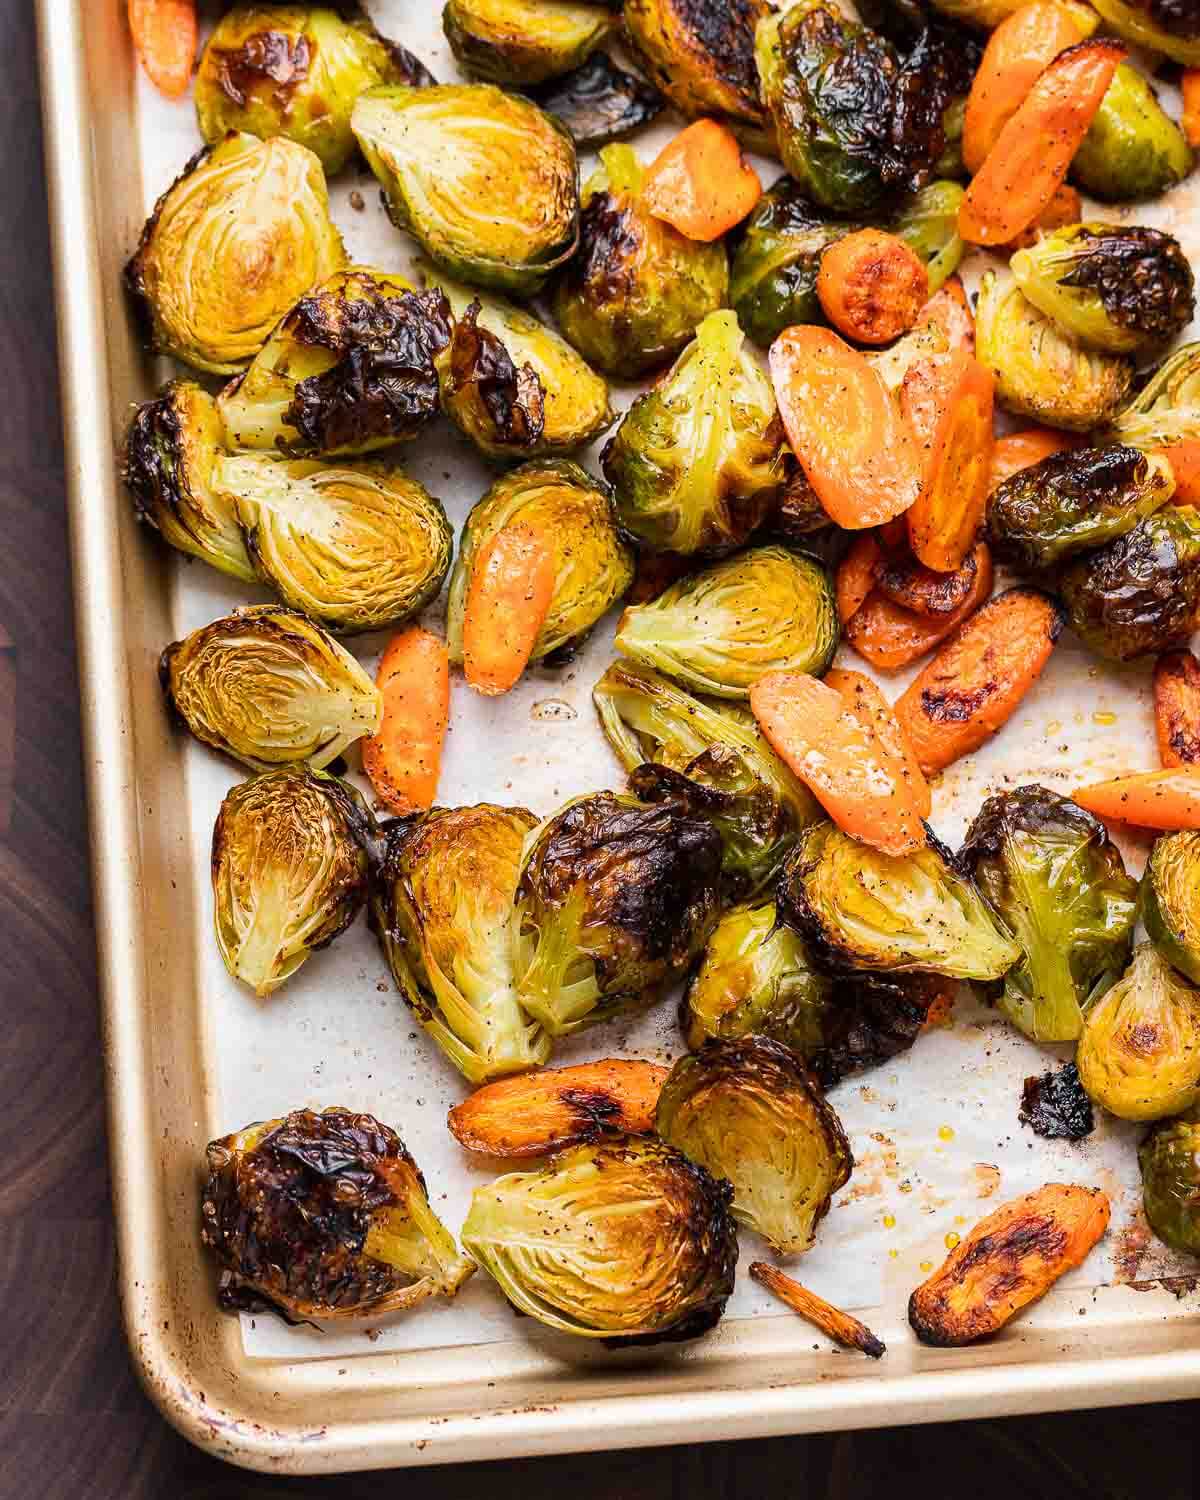 Closeup shot of roasted brussels sprouts and carrots in sheet pan.